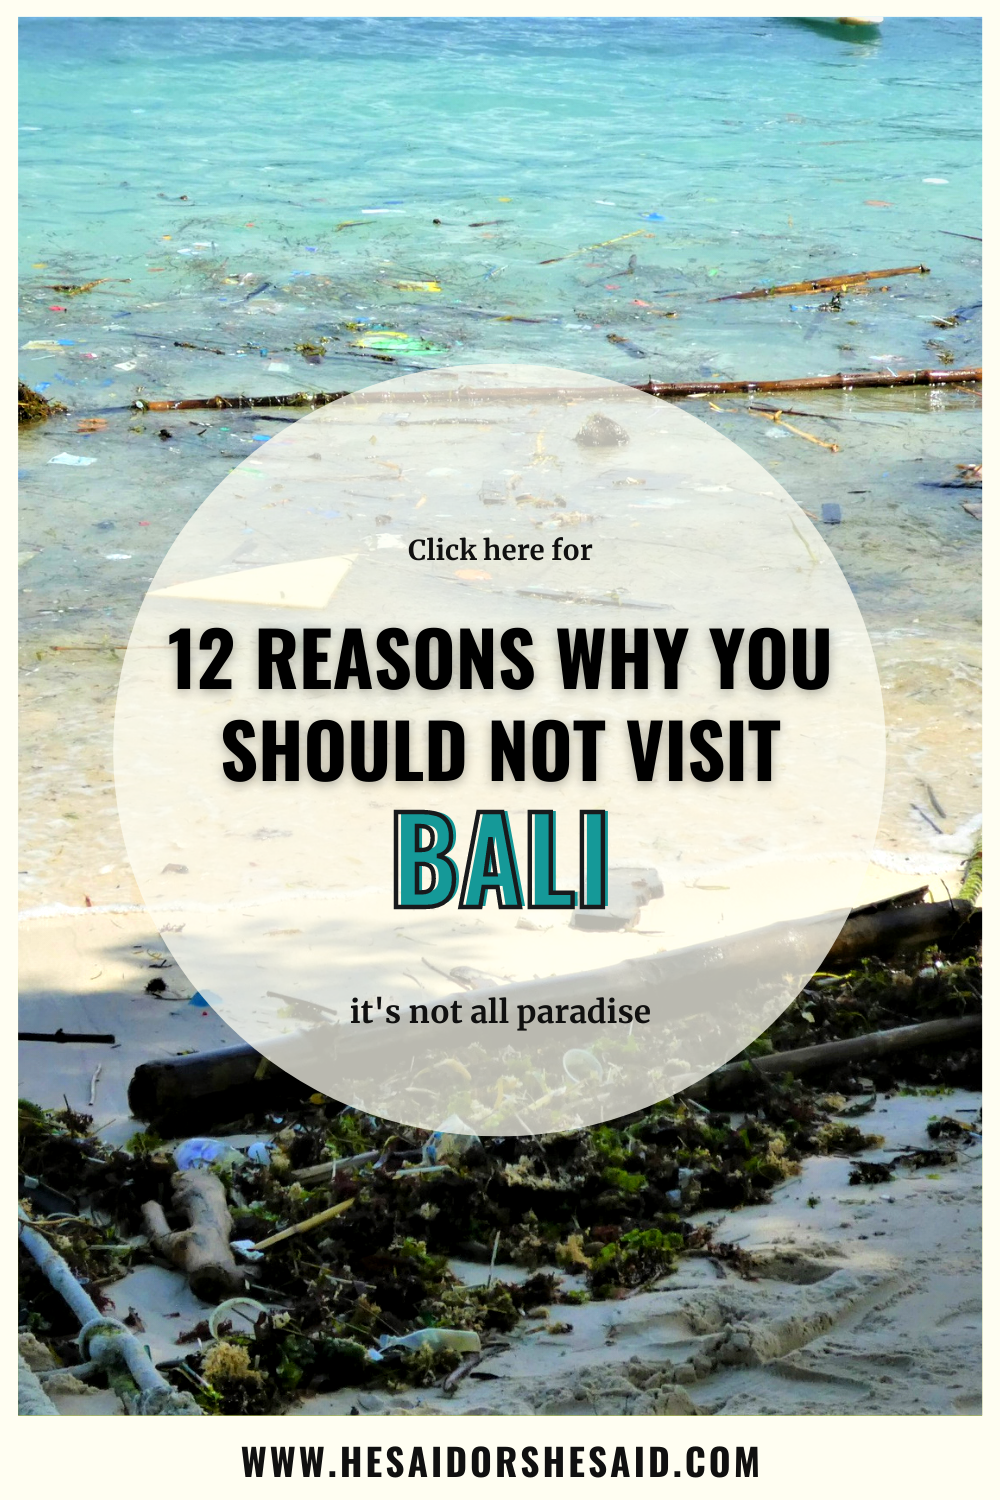 12 reasons why you should not visit Bali by hesaidorshesaid